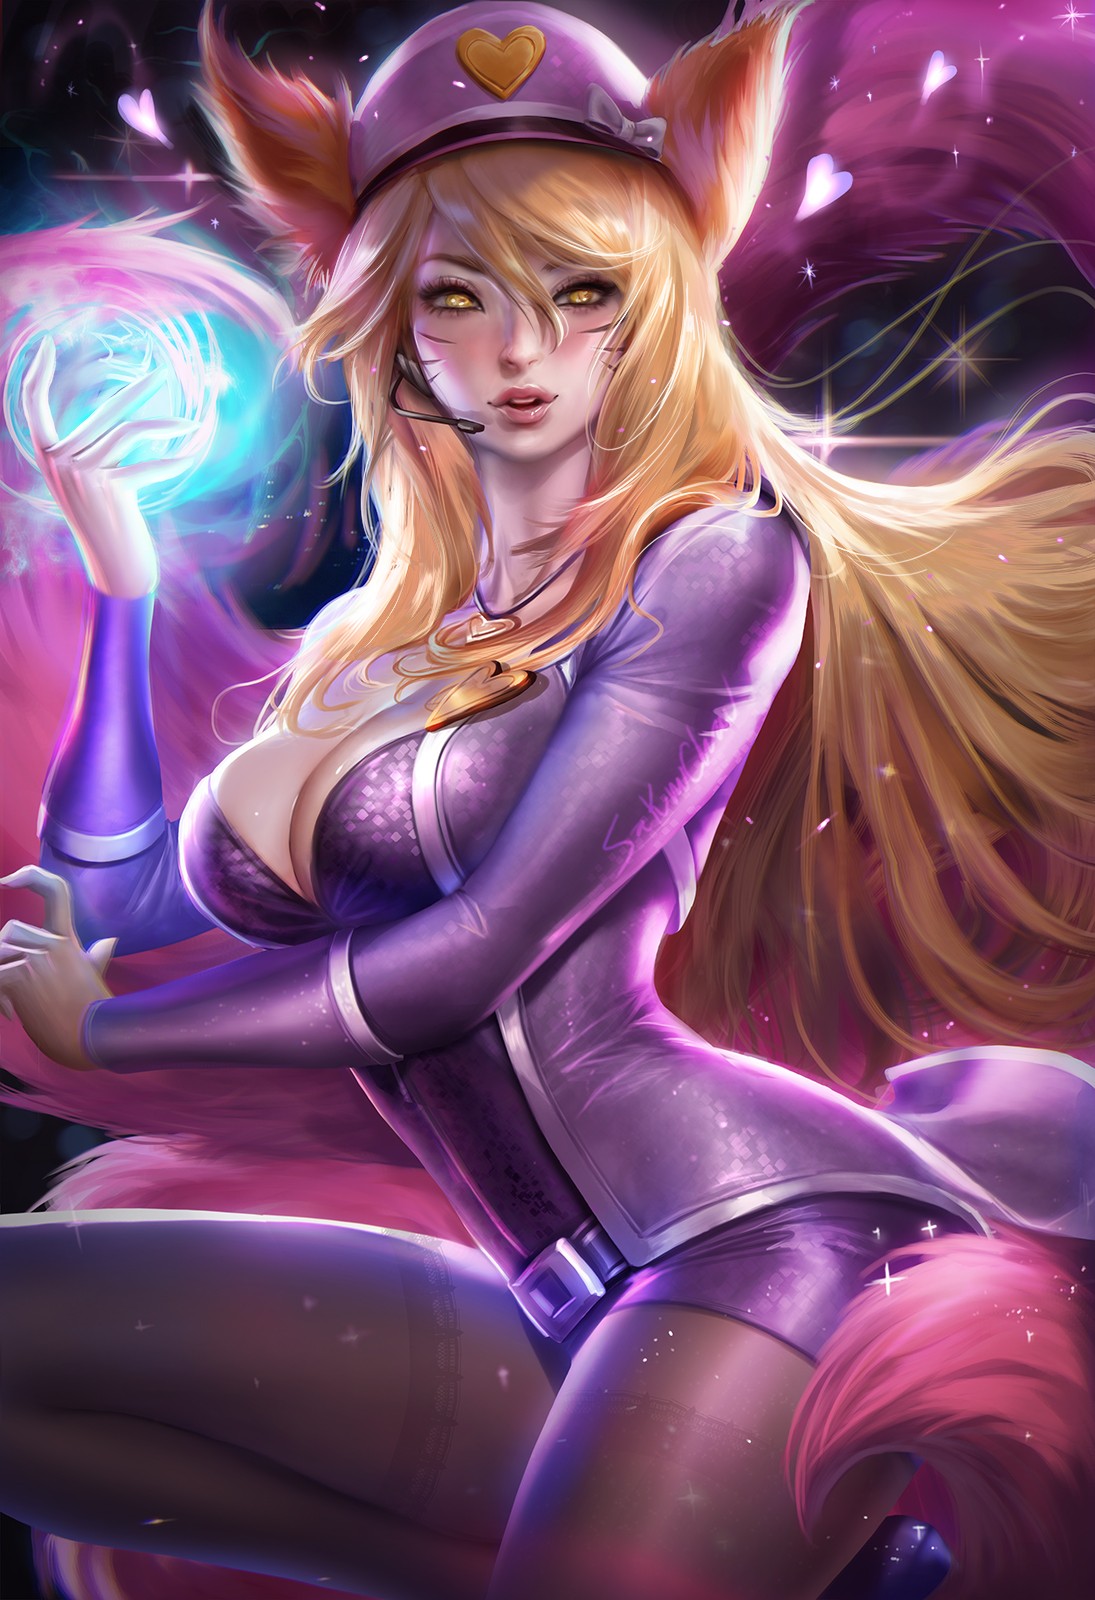 Anime 1095x1600 Sakimichan realistic League of Legends Ahri (League of Legends) PC gaming fan art boobs big boobs curvy video game girls video game characters anime anime girls long hair blonde yellow eyes